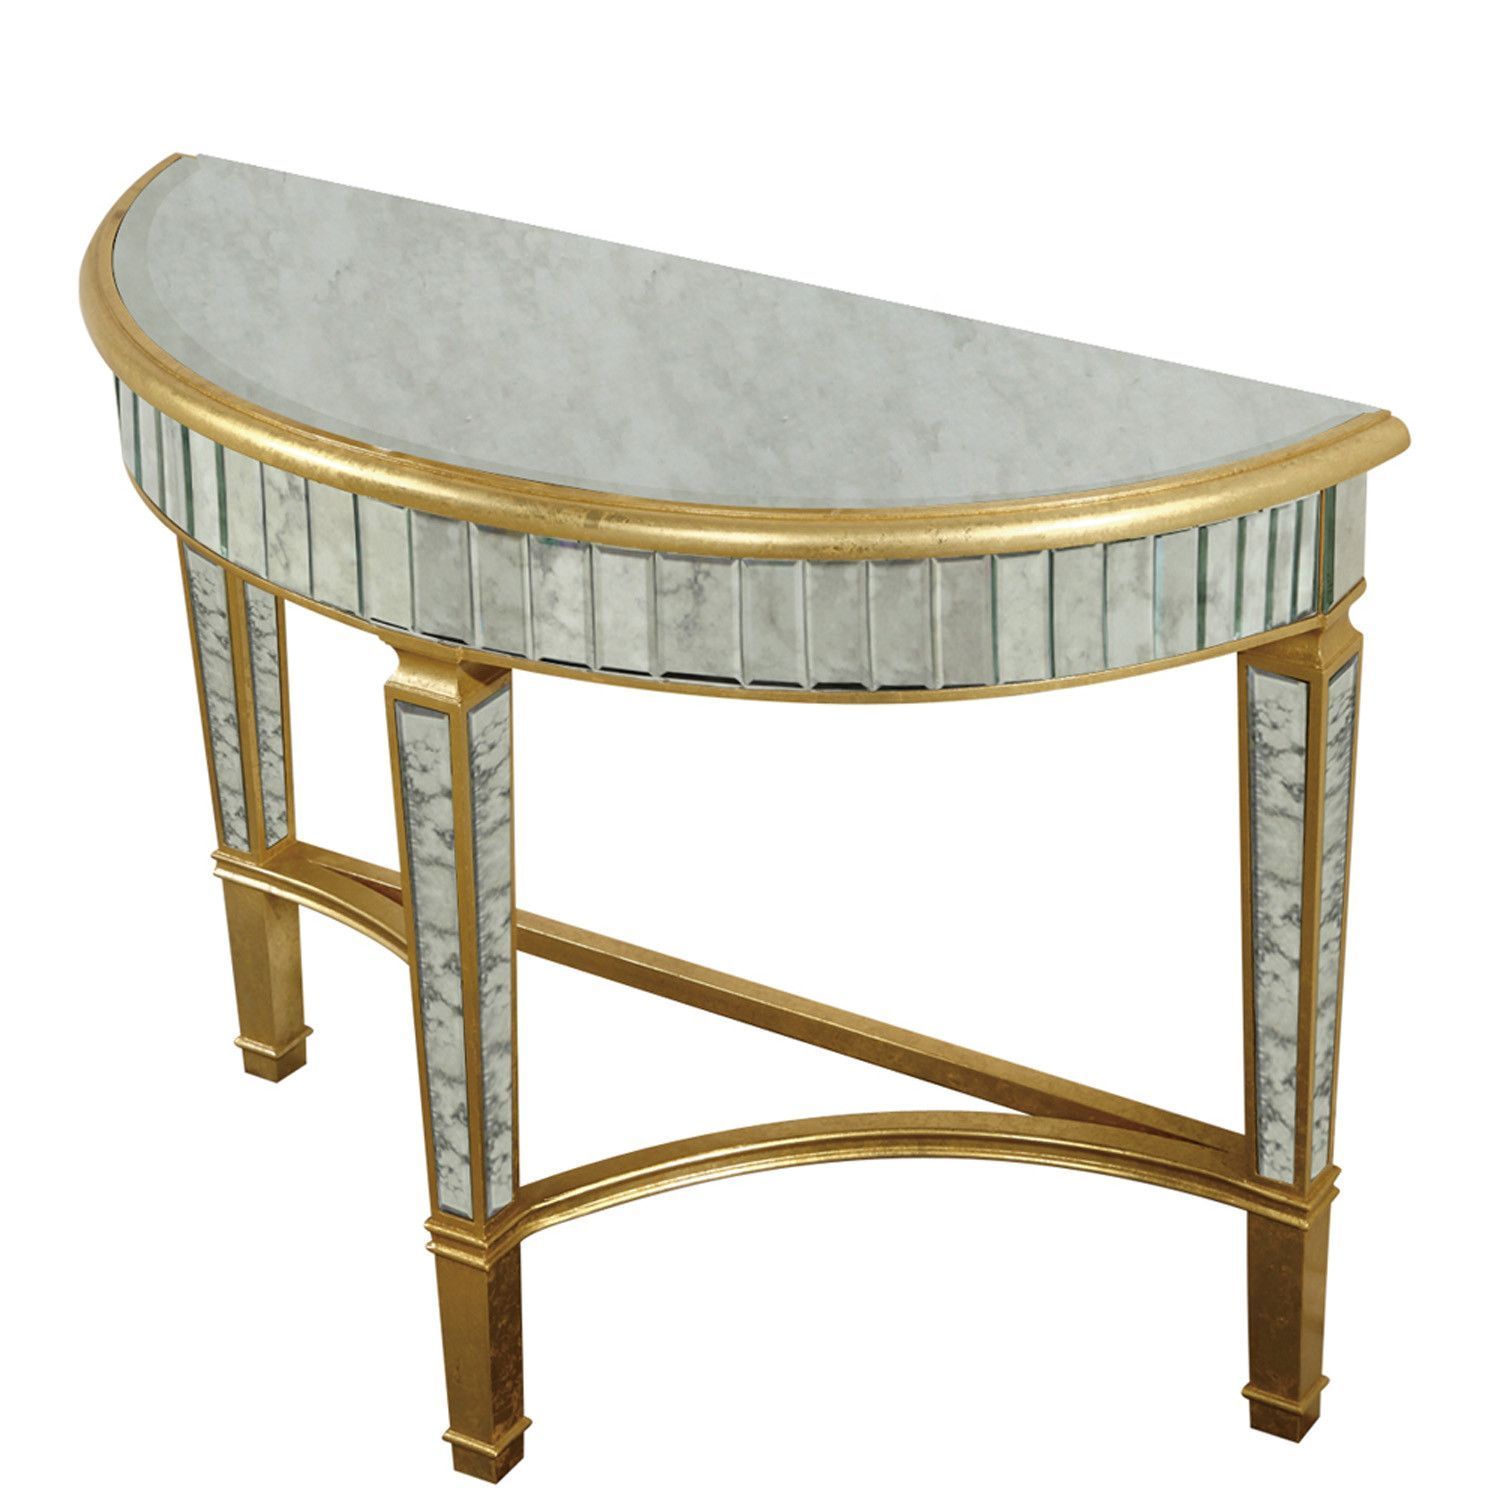 Elegant Lighting – Half Moon Table, Gold/antique Mirror | Half Moon Pertaining To Antique Mirror Console Tables (View 6 of 20)